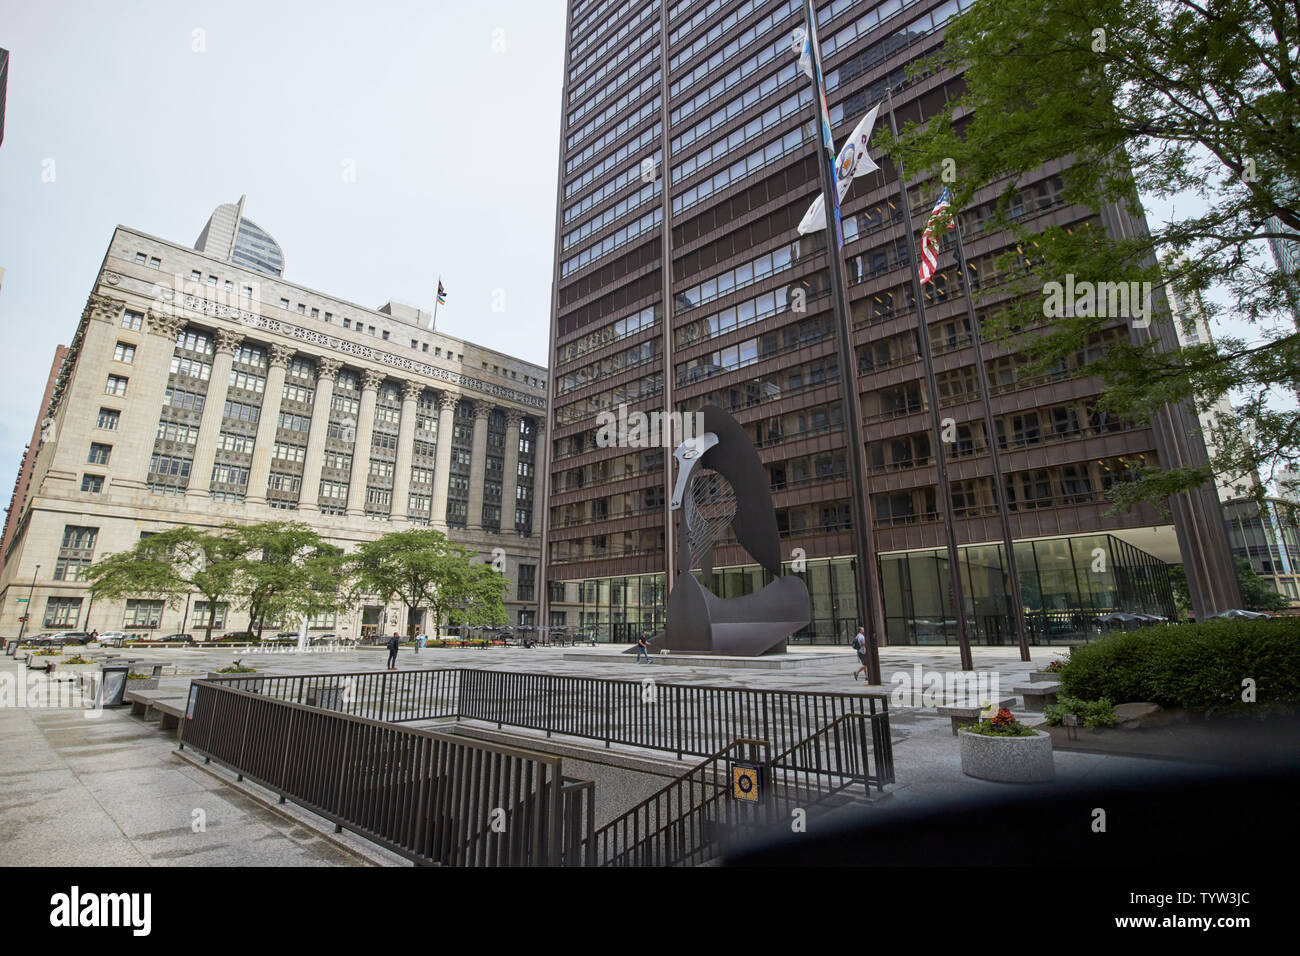 richard J. daley center or daley plaza with picasso sculpture courthouse and city hall county building Chicago IL USA Stock Photo